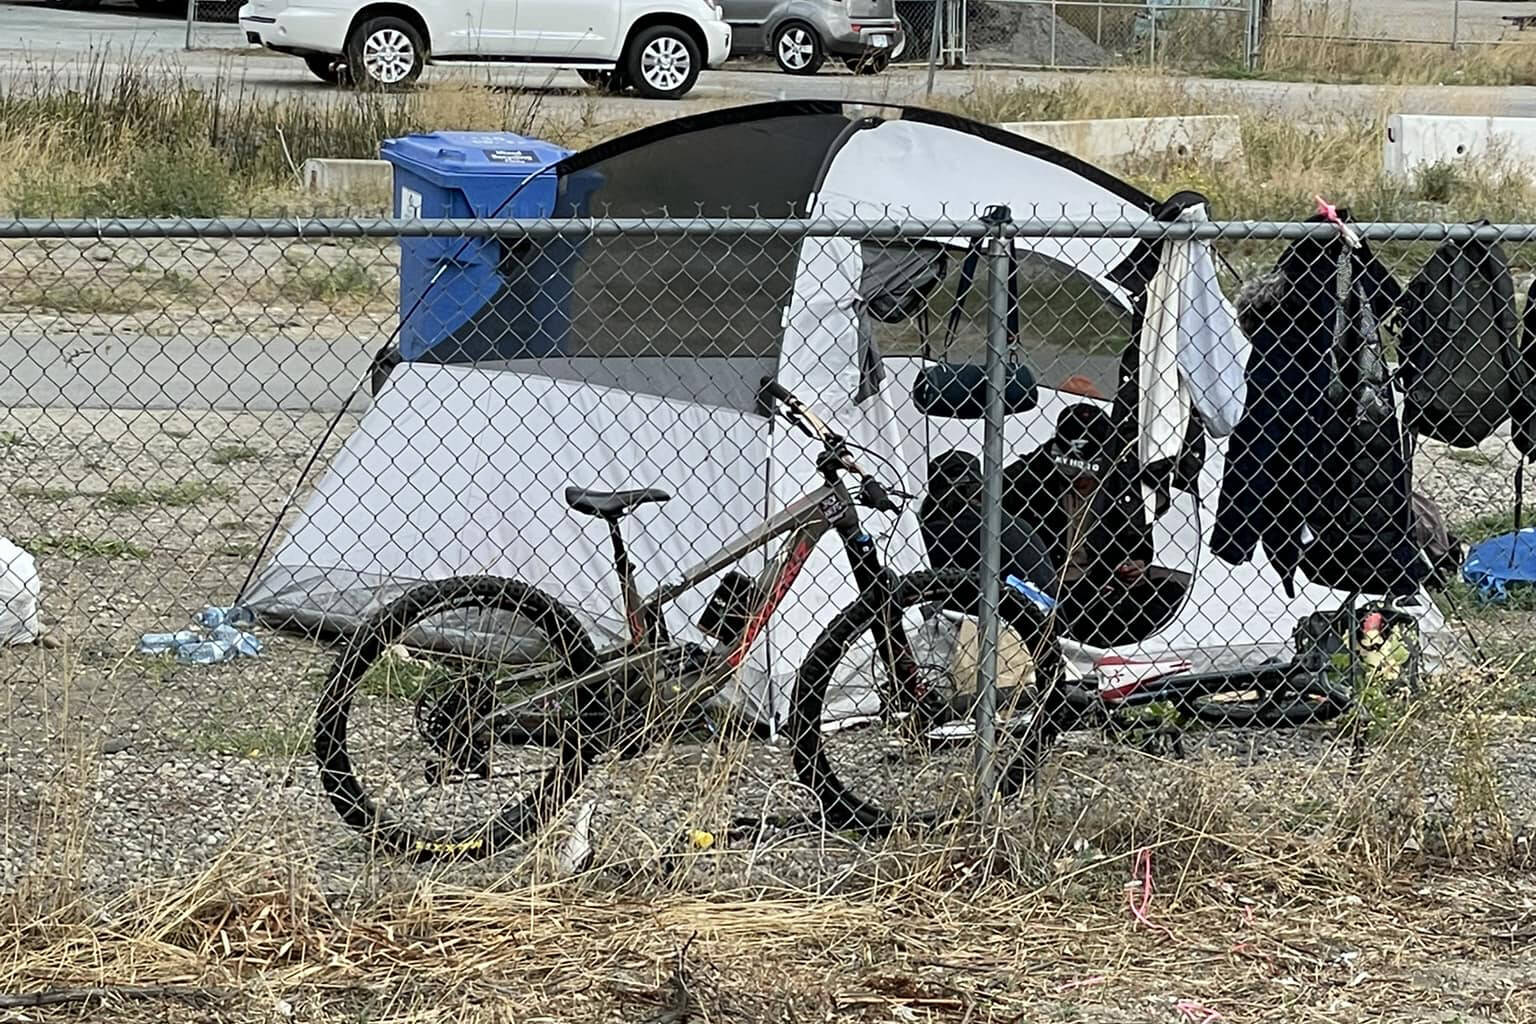 A person living in a tent (not pictured) was run over and dragged by the driver of a Dodge Ram at the Rail Trail homeless encampment. The person was taken to hospital with significant injuries. (Facebook)